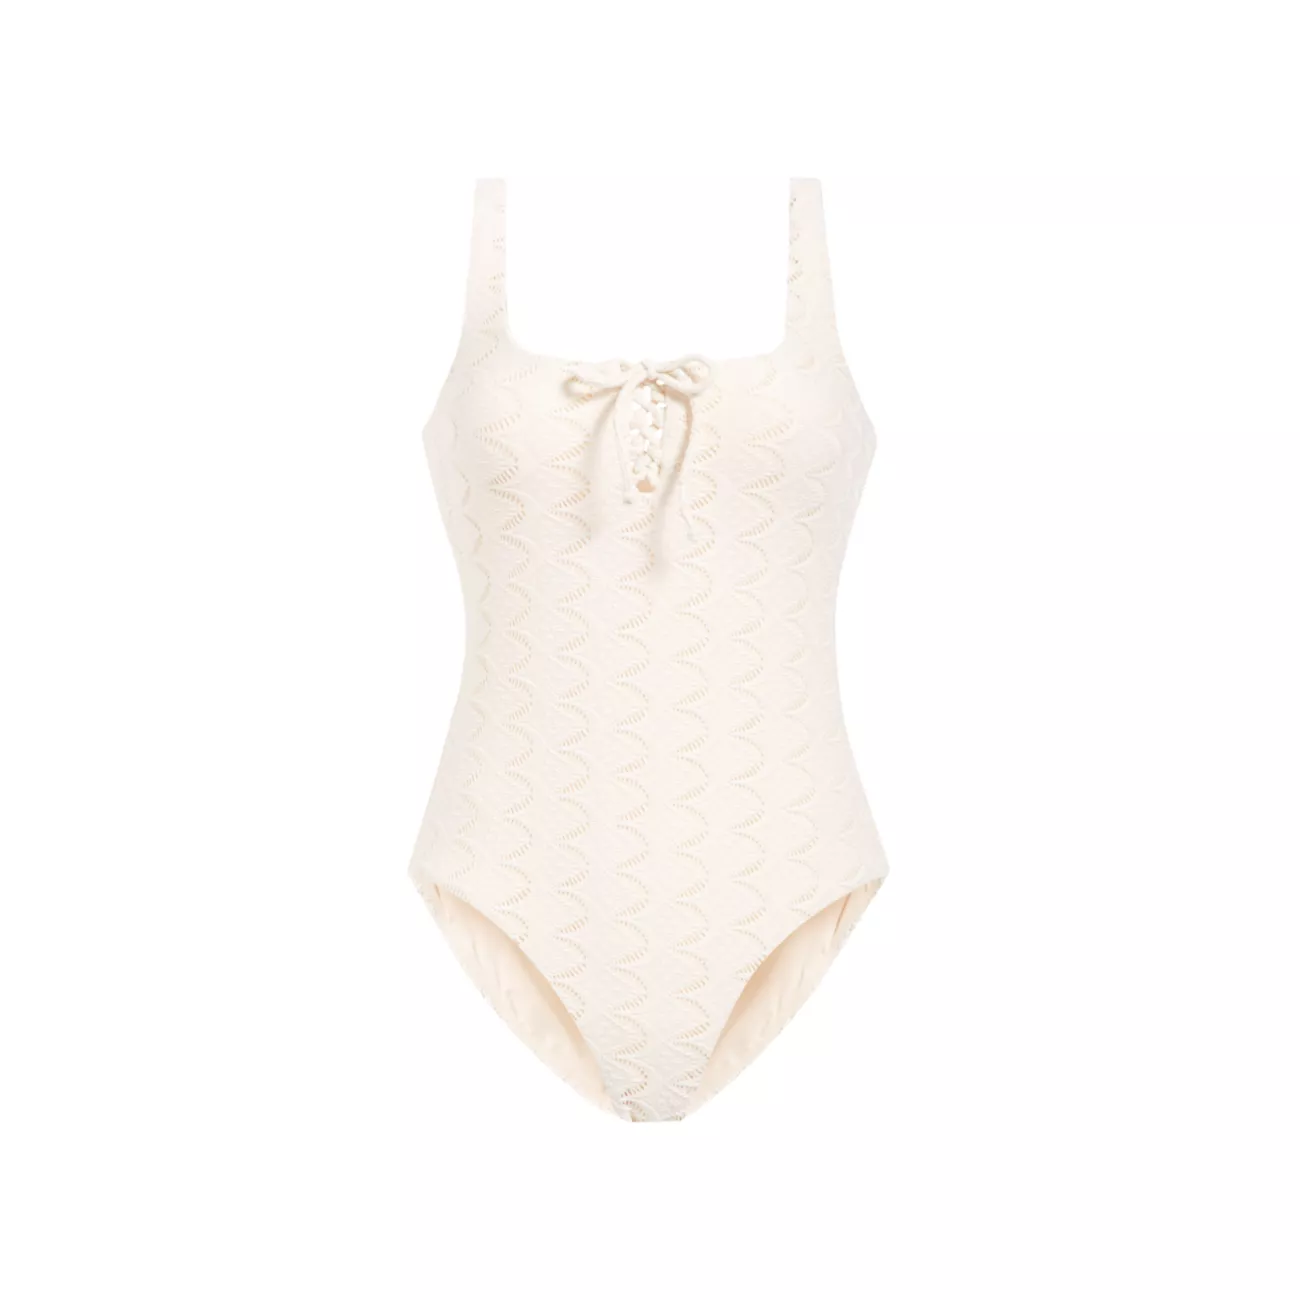 The Macao One-Piece Swimsuit Andie Swim